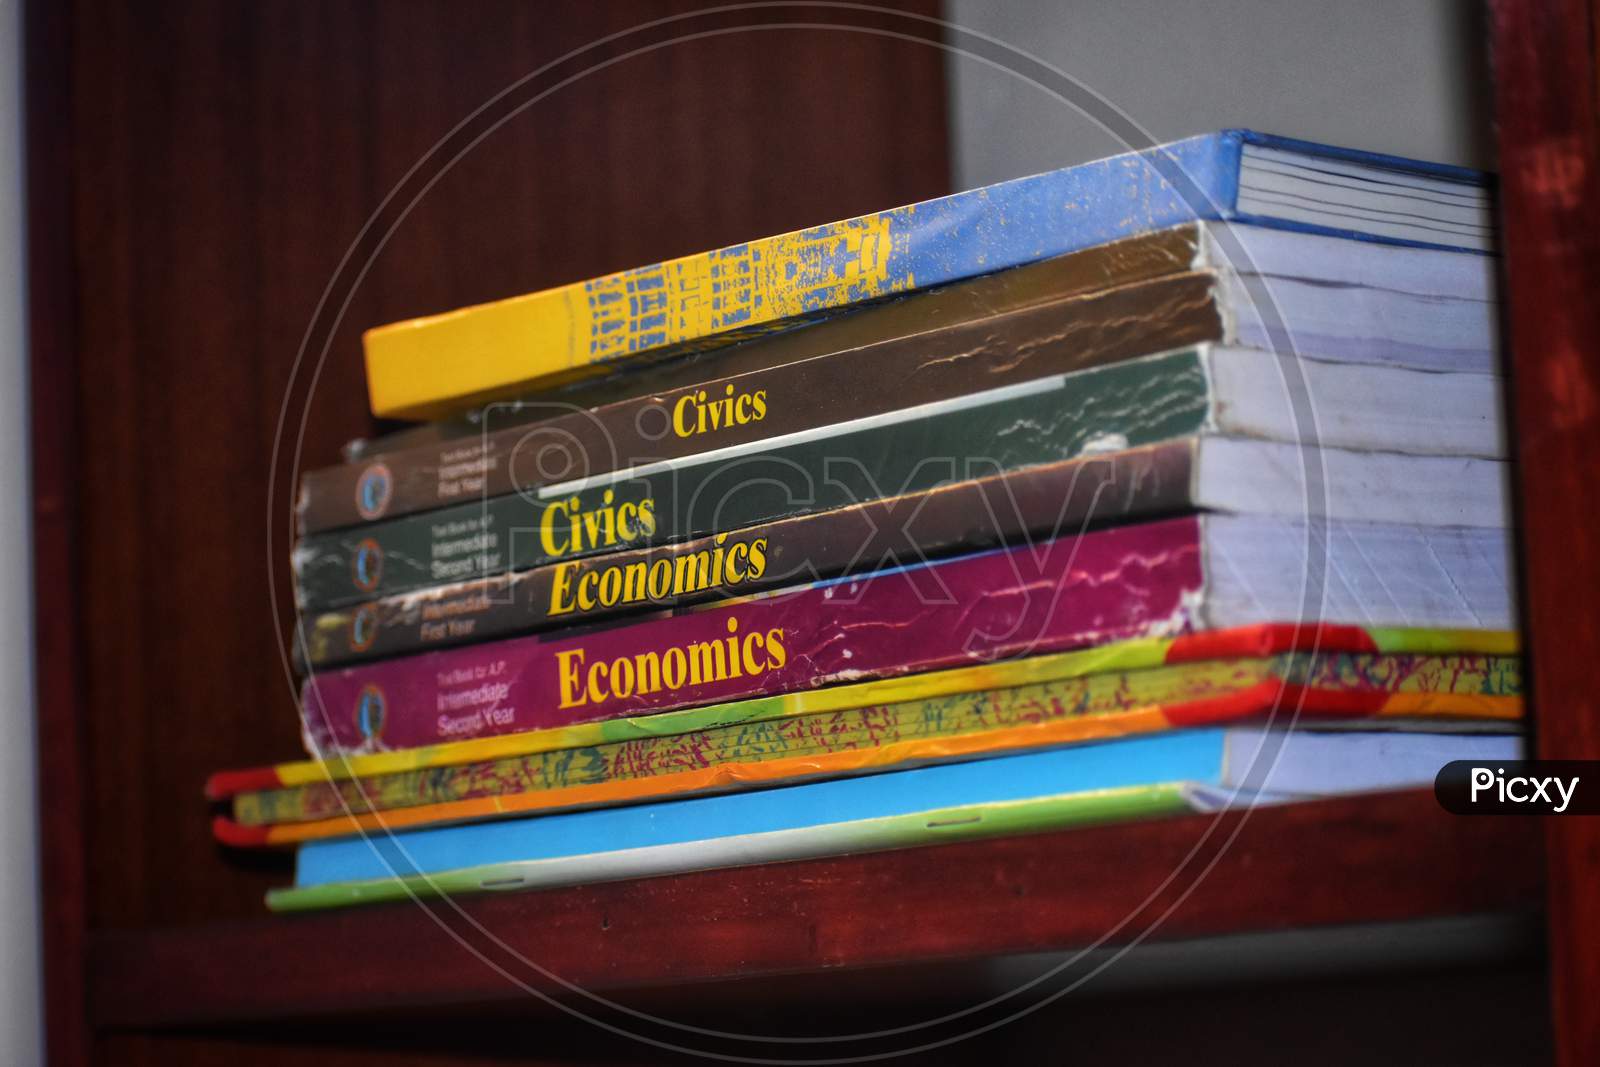 Many Books Piles. Hardback Books On Wooden Table. Back To School. Copy Space, Civies, Economics, India